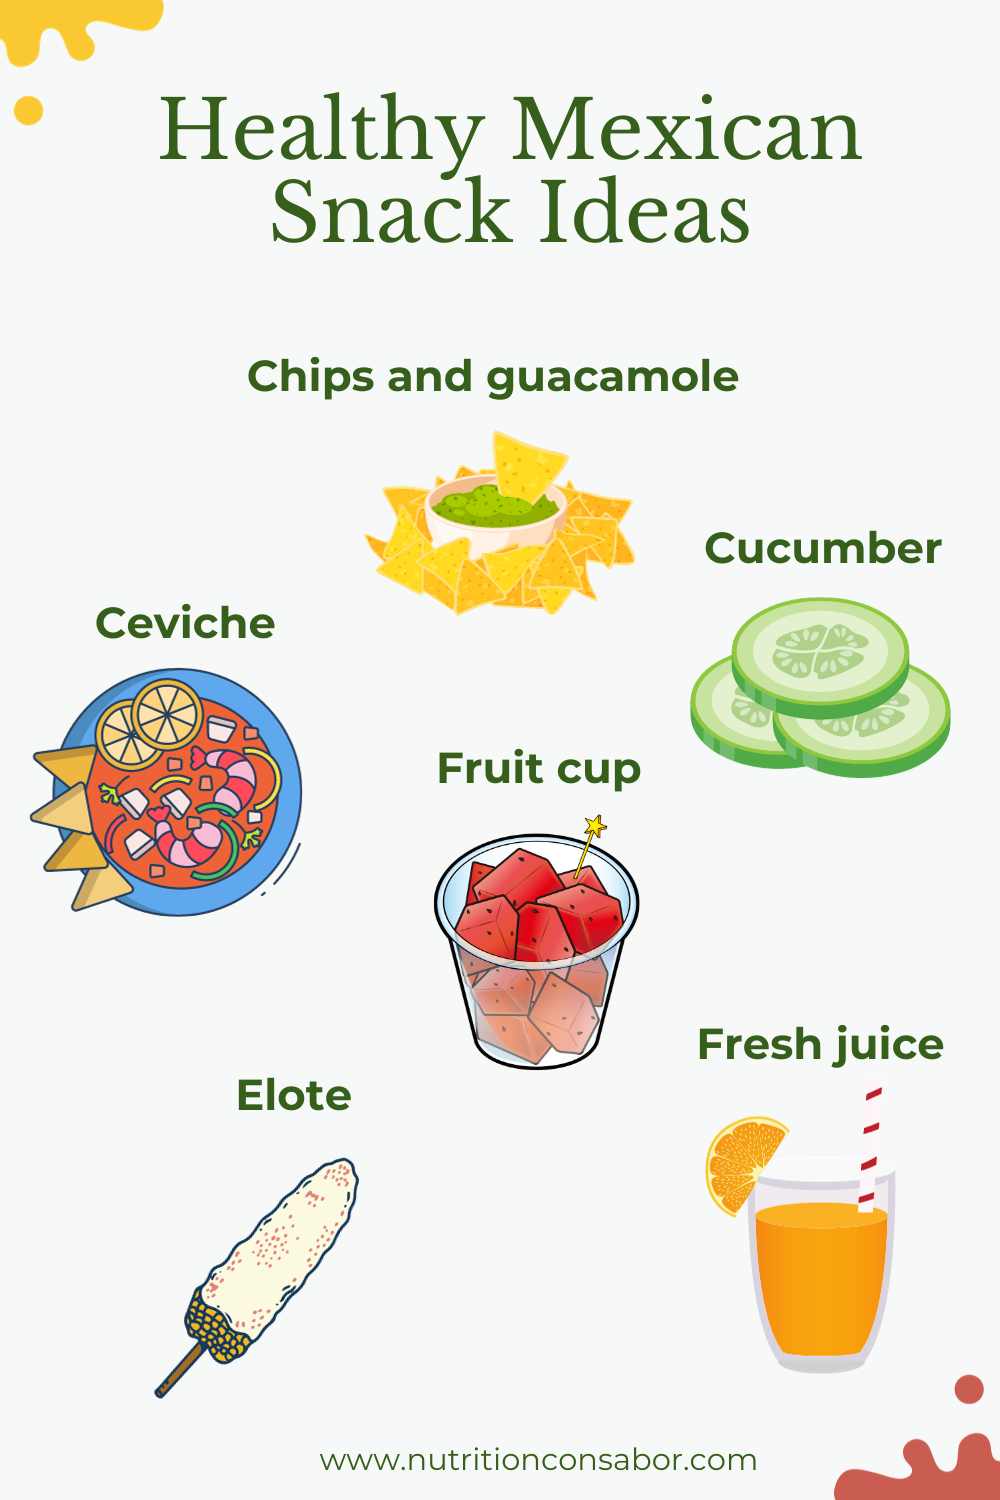 Illustration of healthy mexican snack ideas like chips with guacamole, fruit cups, cucumber, and more.